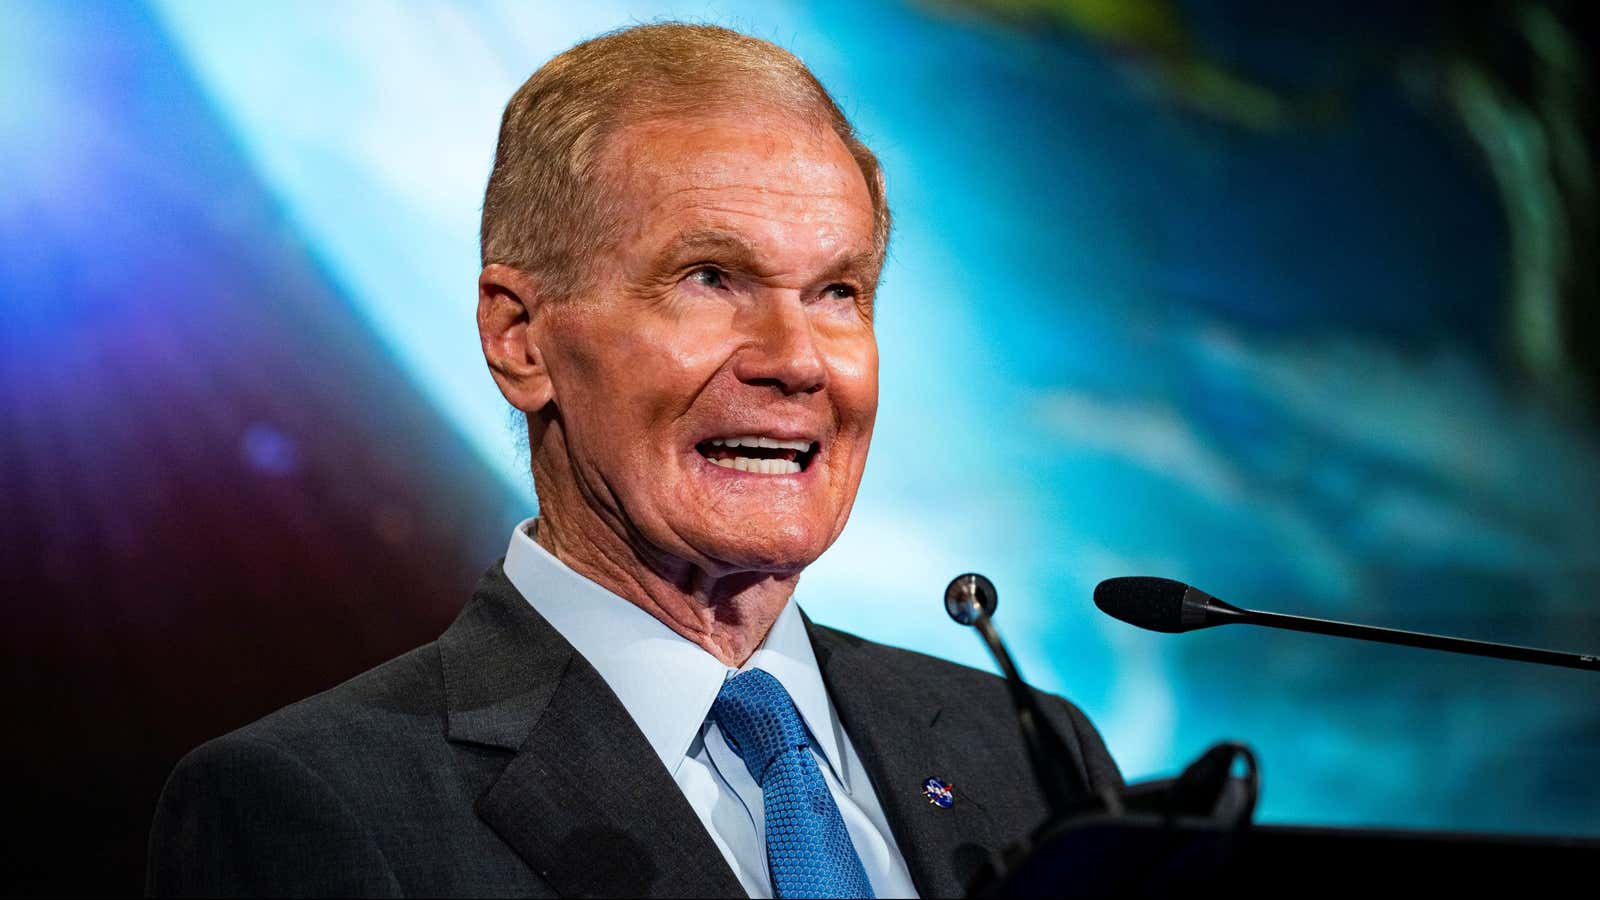 “Are there other planet Earths out there?” NASA administrator Bill Nelson said. “I certainly think so, because the universe is so big.”